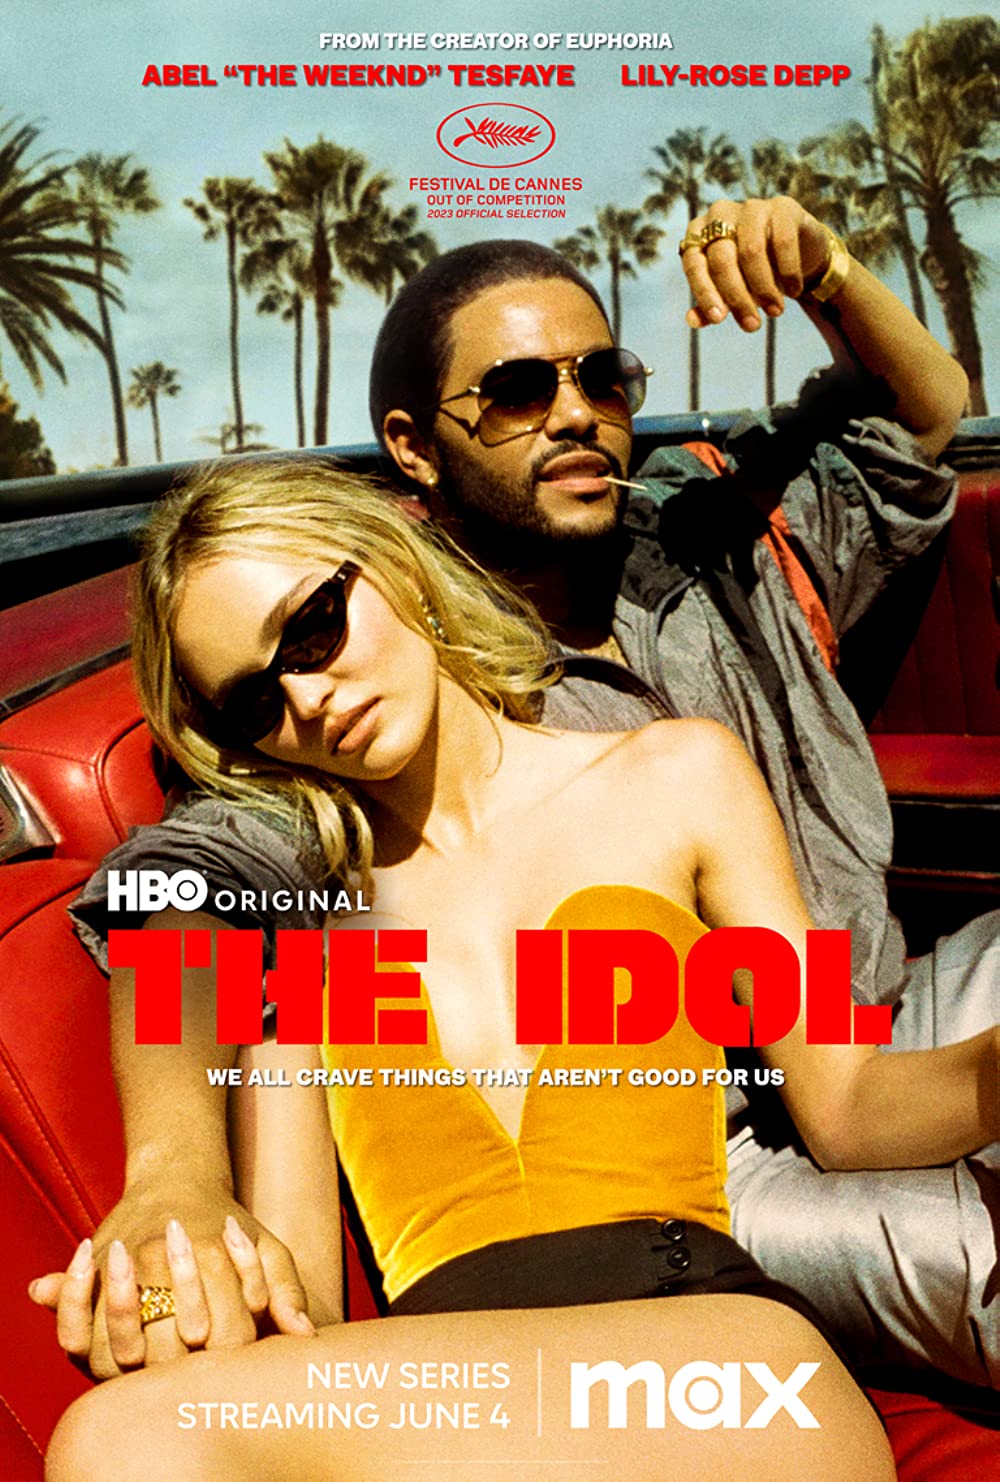 HBOs controversial new Sunday series The Idol has Lily-Rose Depp and The Weeknd as its lead characters.